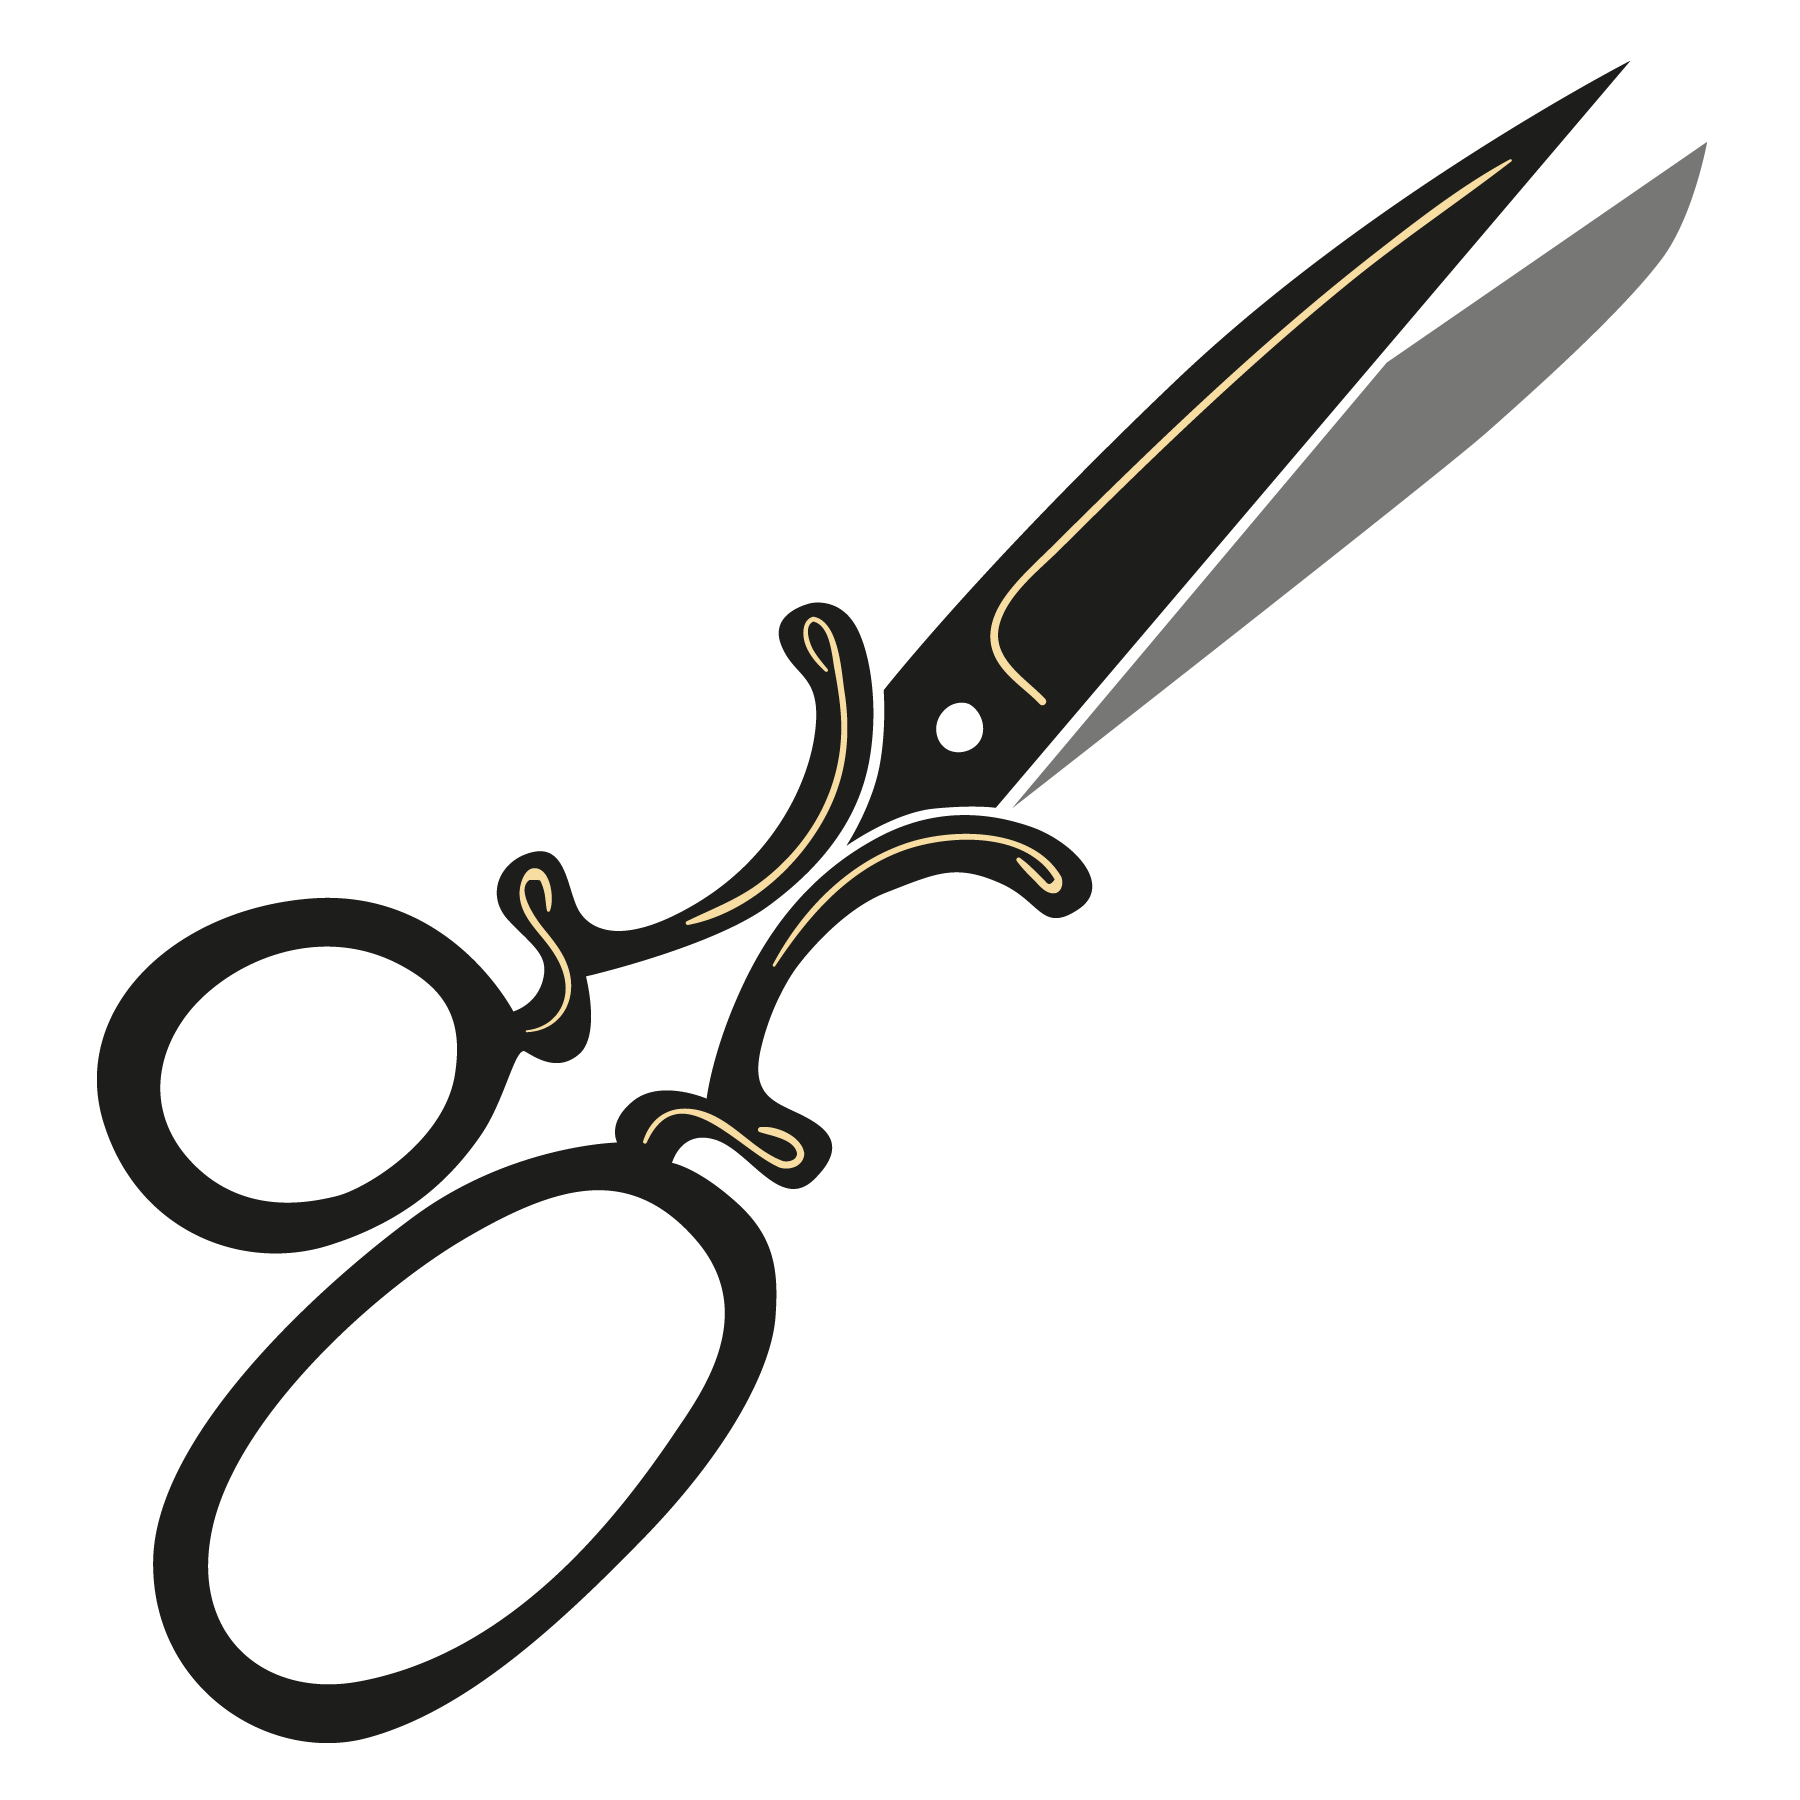 Textile arts notions embroidery. Shears clipart sewing accessory